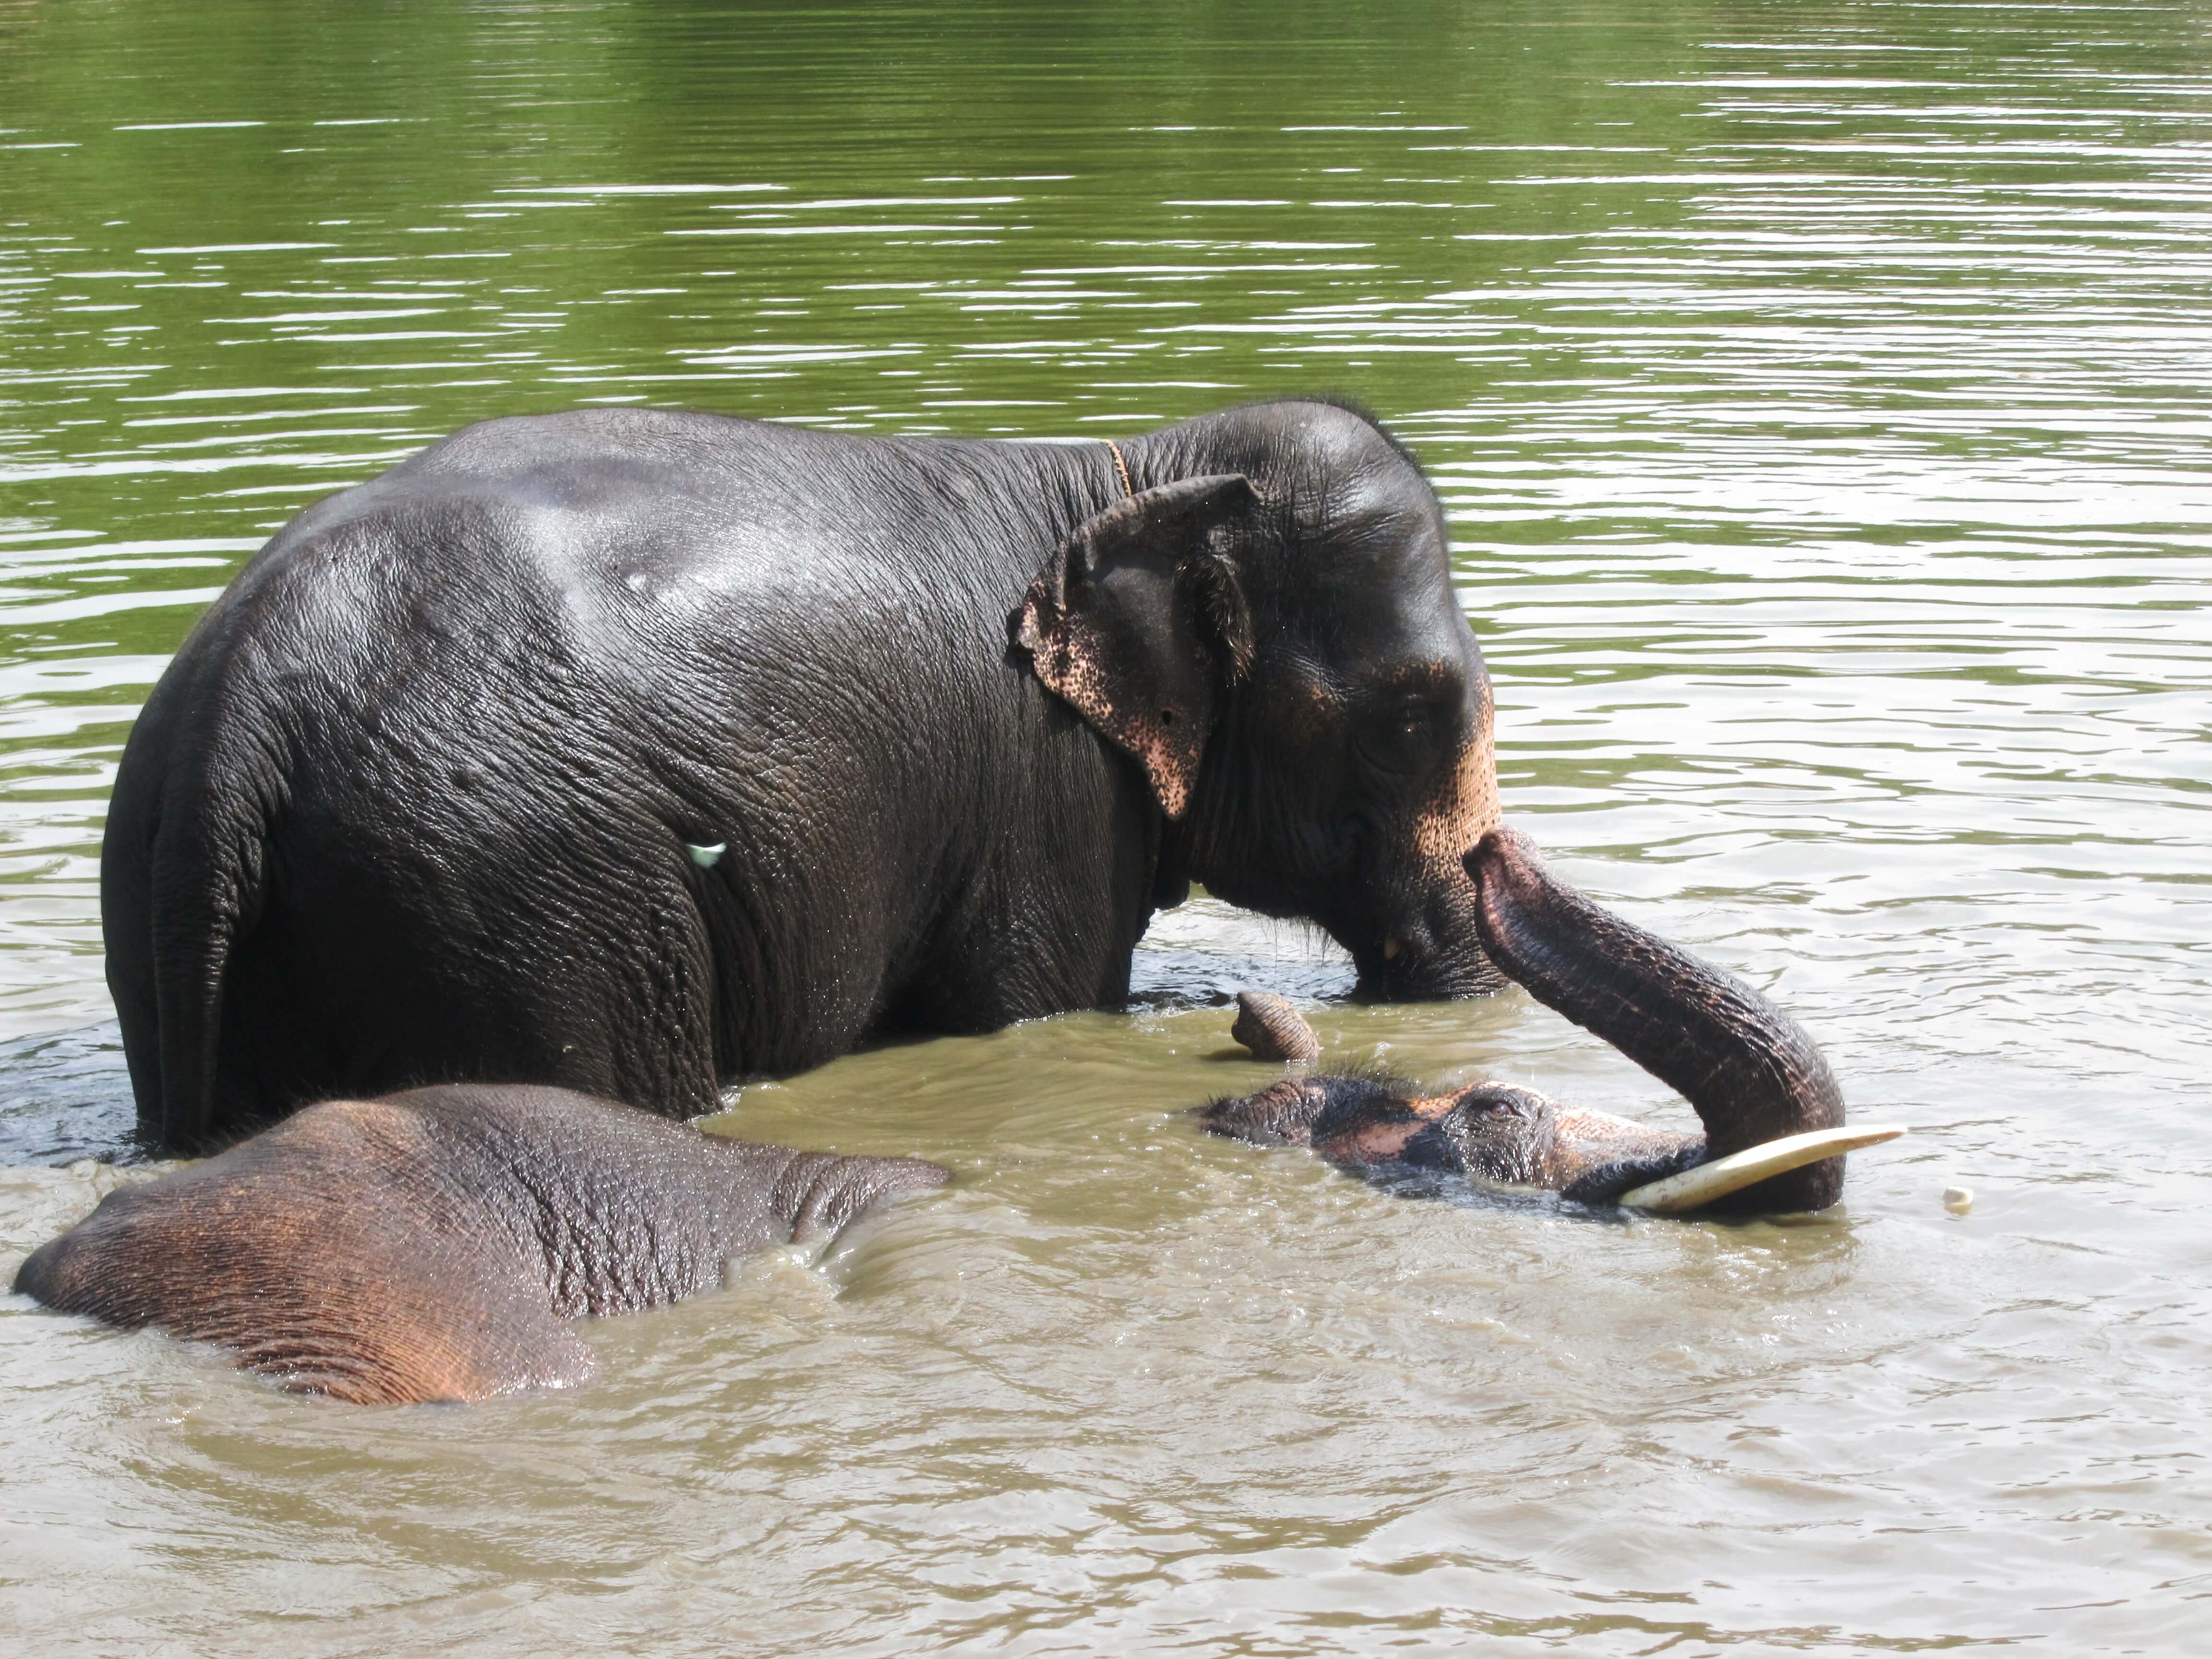 Sunder uses his trunk as a snorkel and to reach out to Lakshmi.